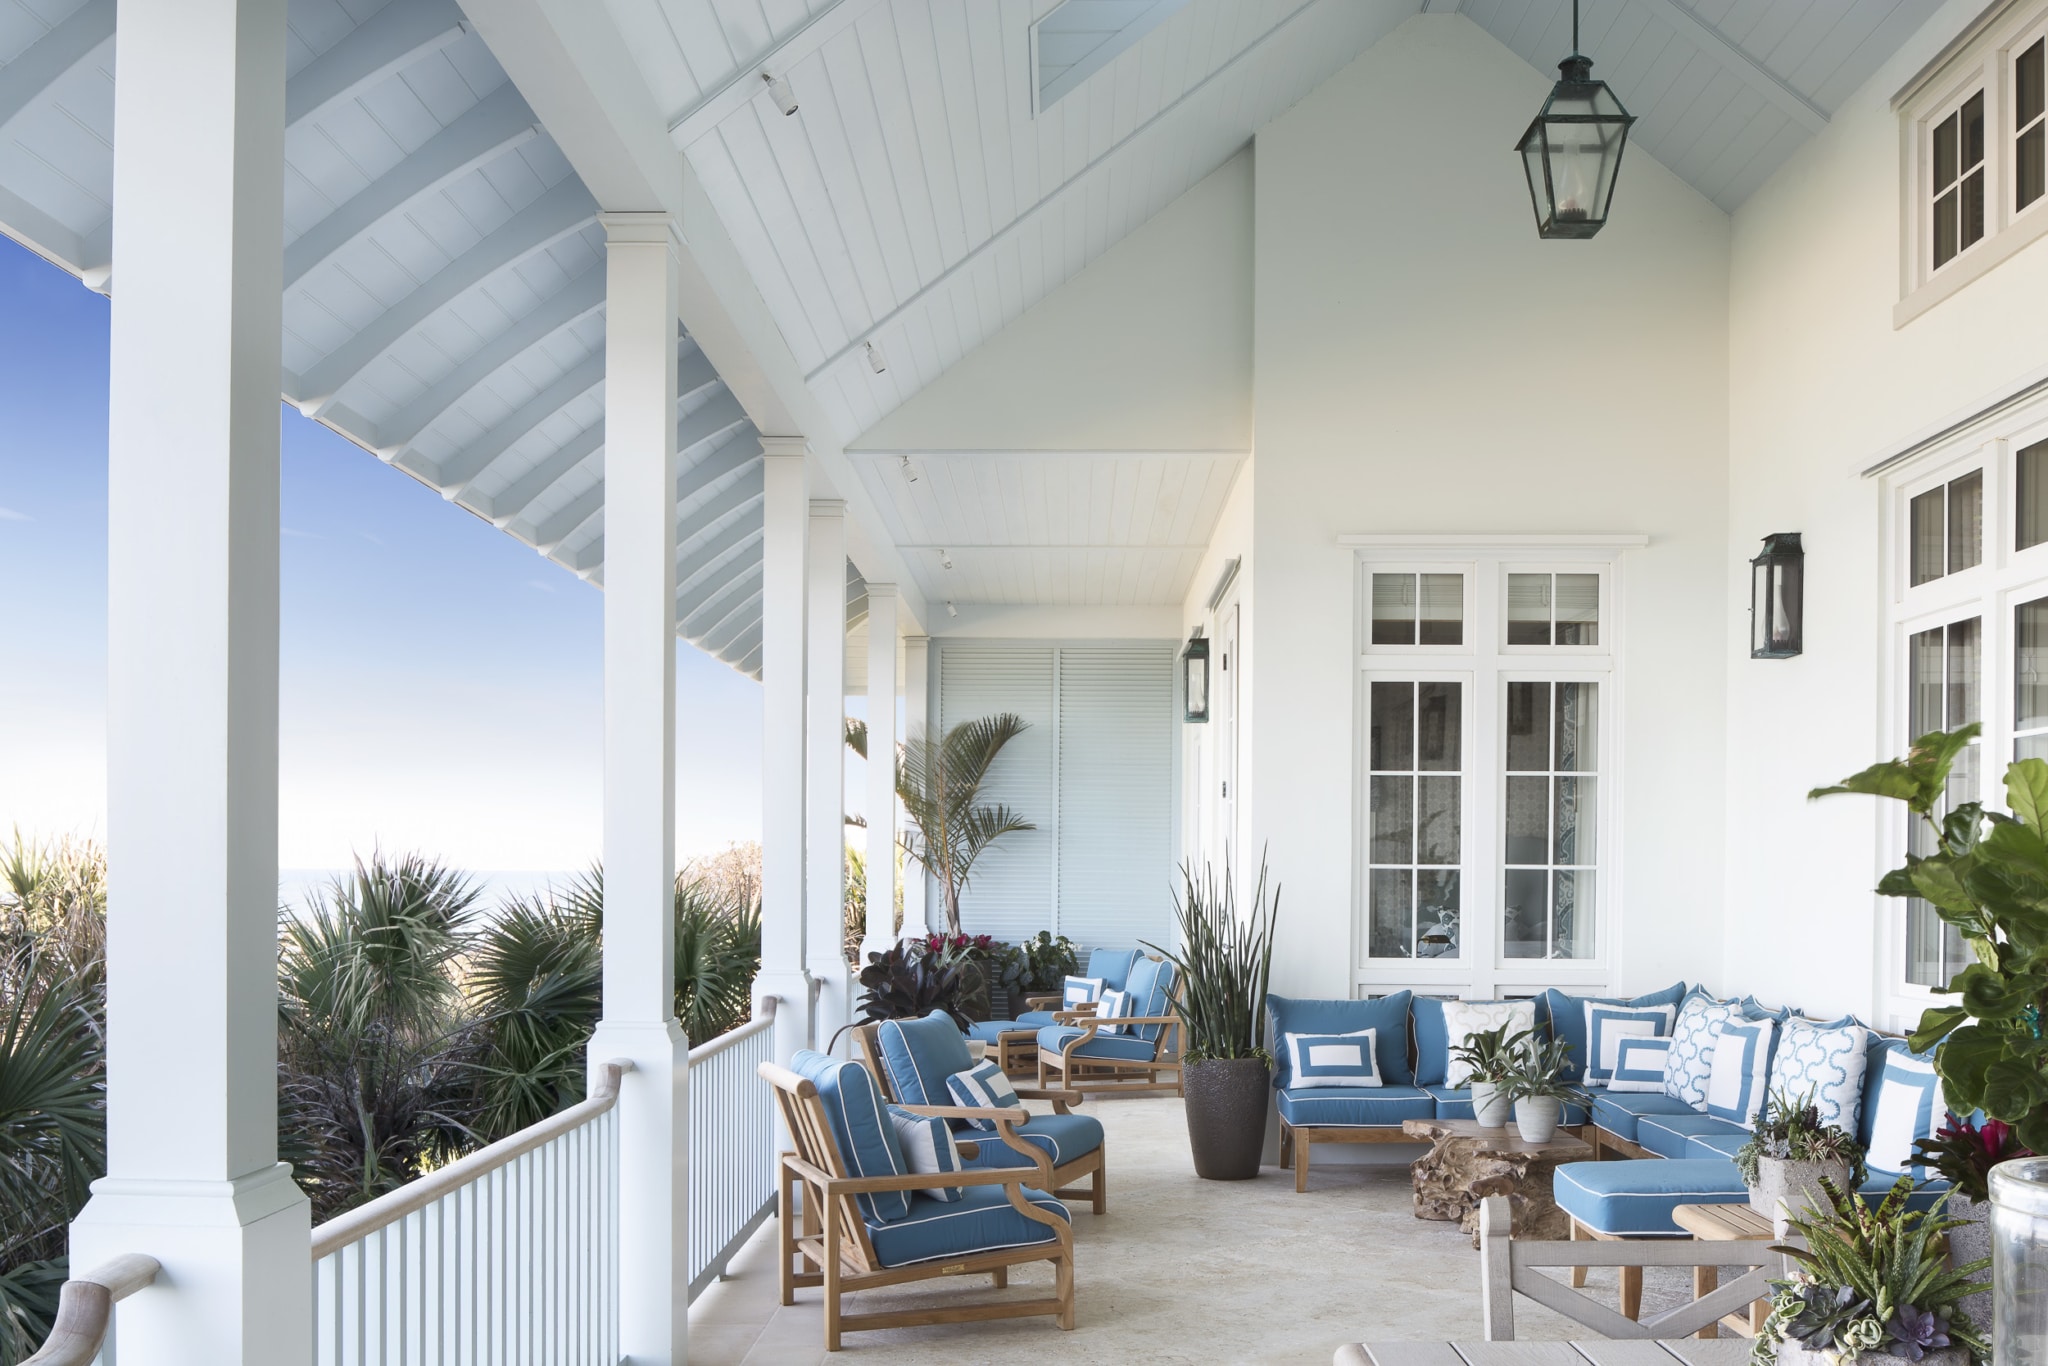 The architecture and design of Windsor a Vero Beach community - beachside - Jessica Glynn Photography - Hadley Keller Author - Vendome press - covered porch in blue and white